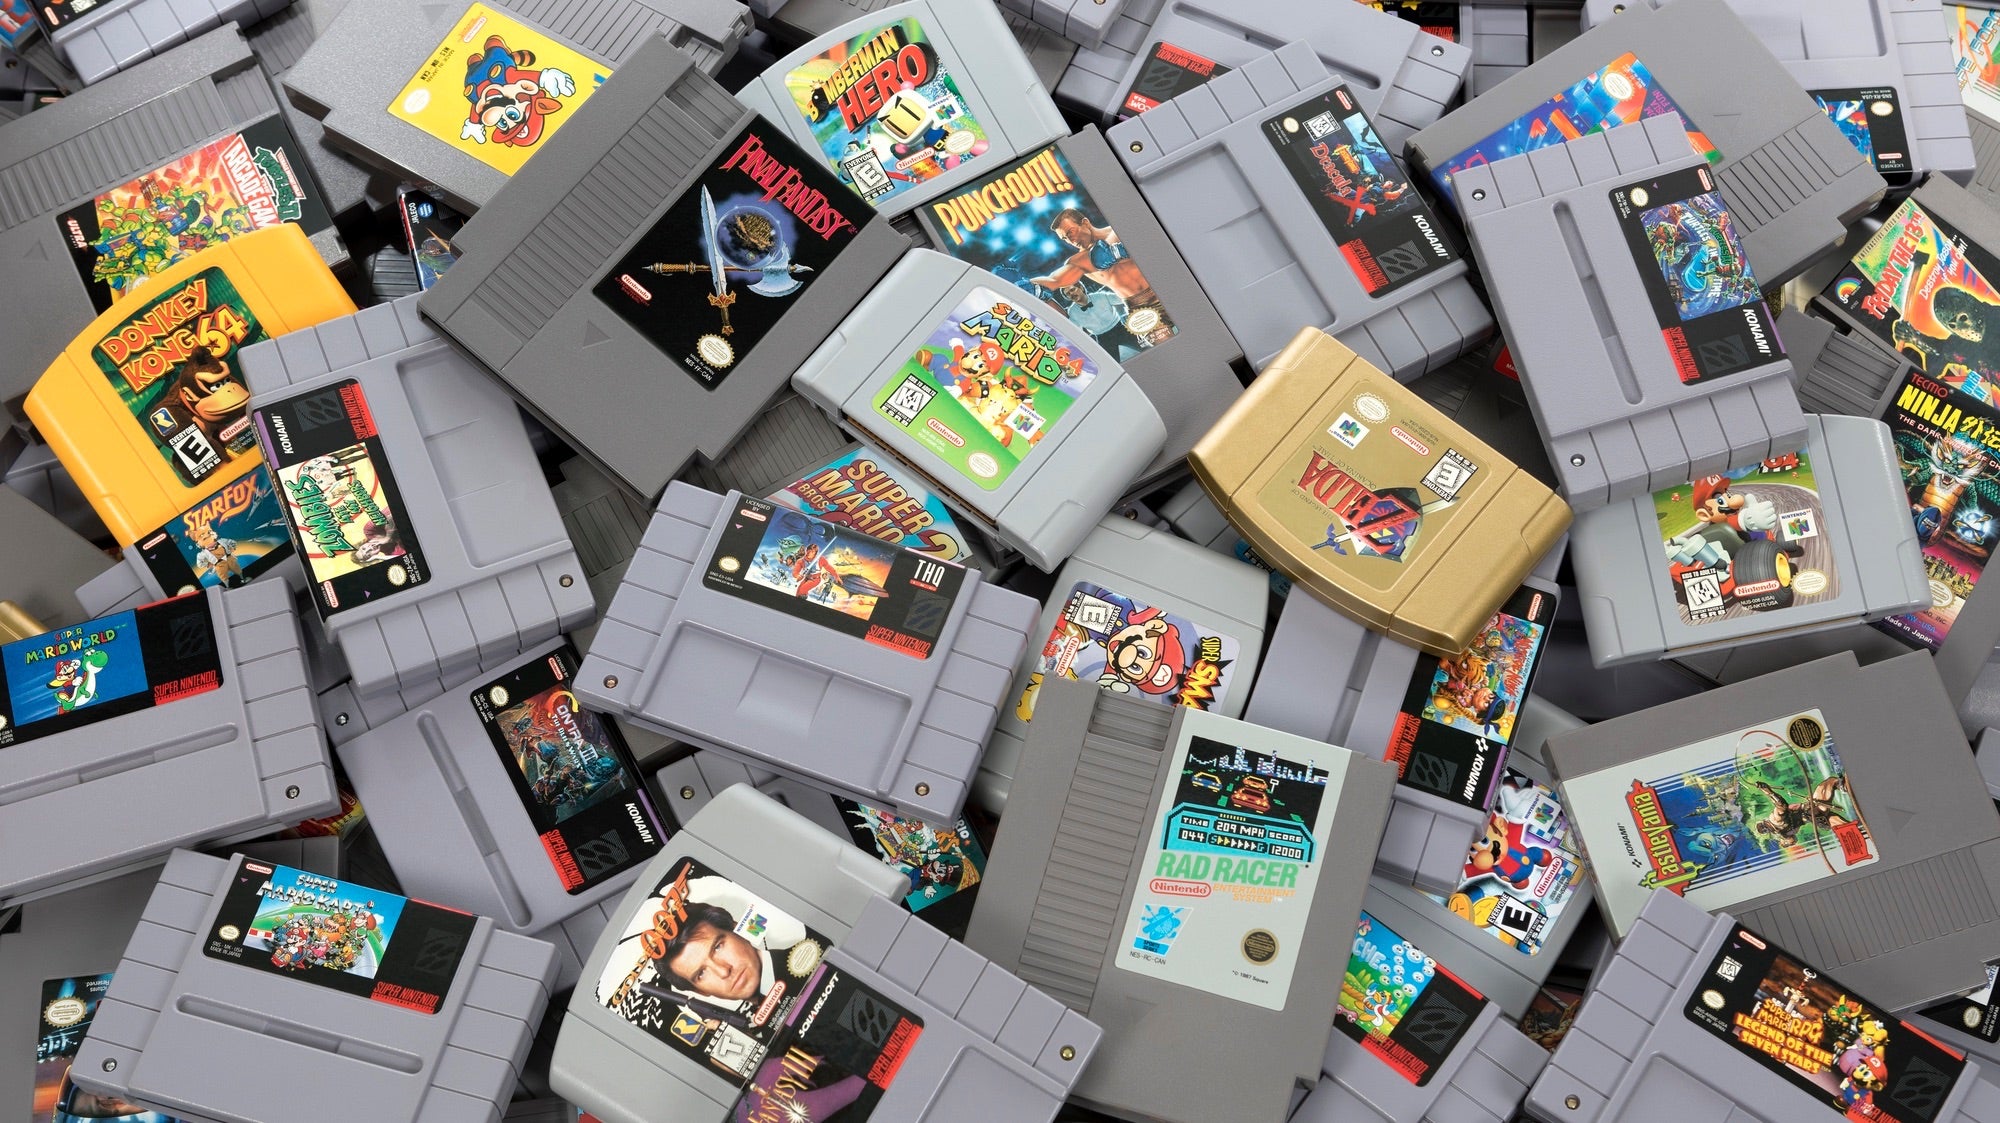 Why you should still buy physical copies of video games